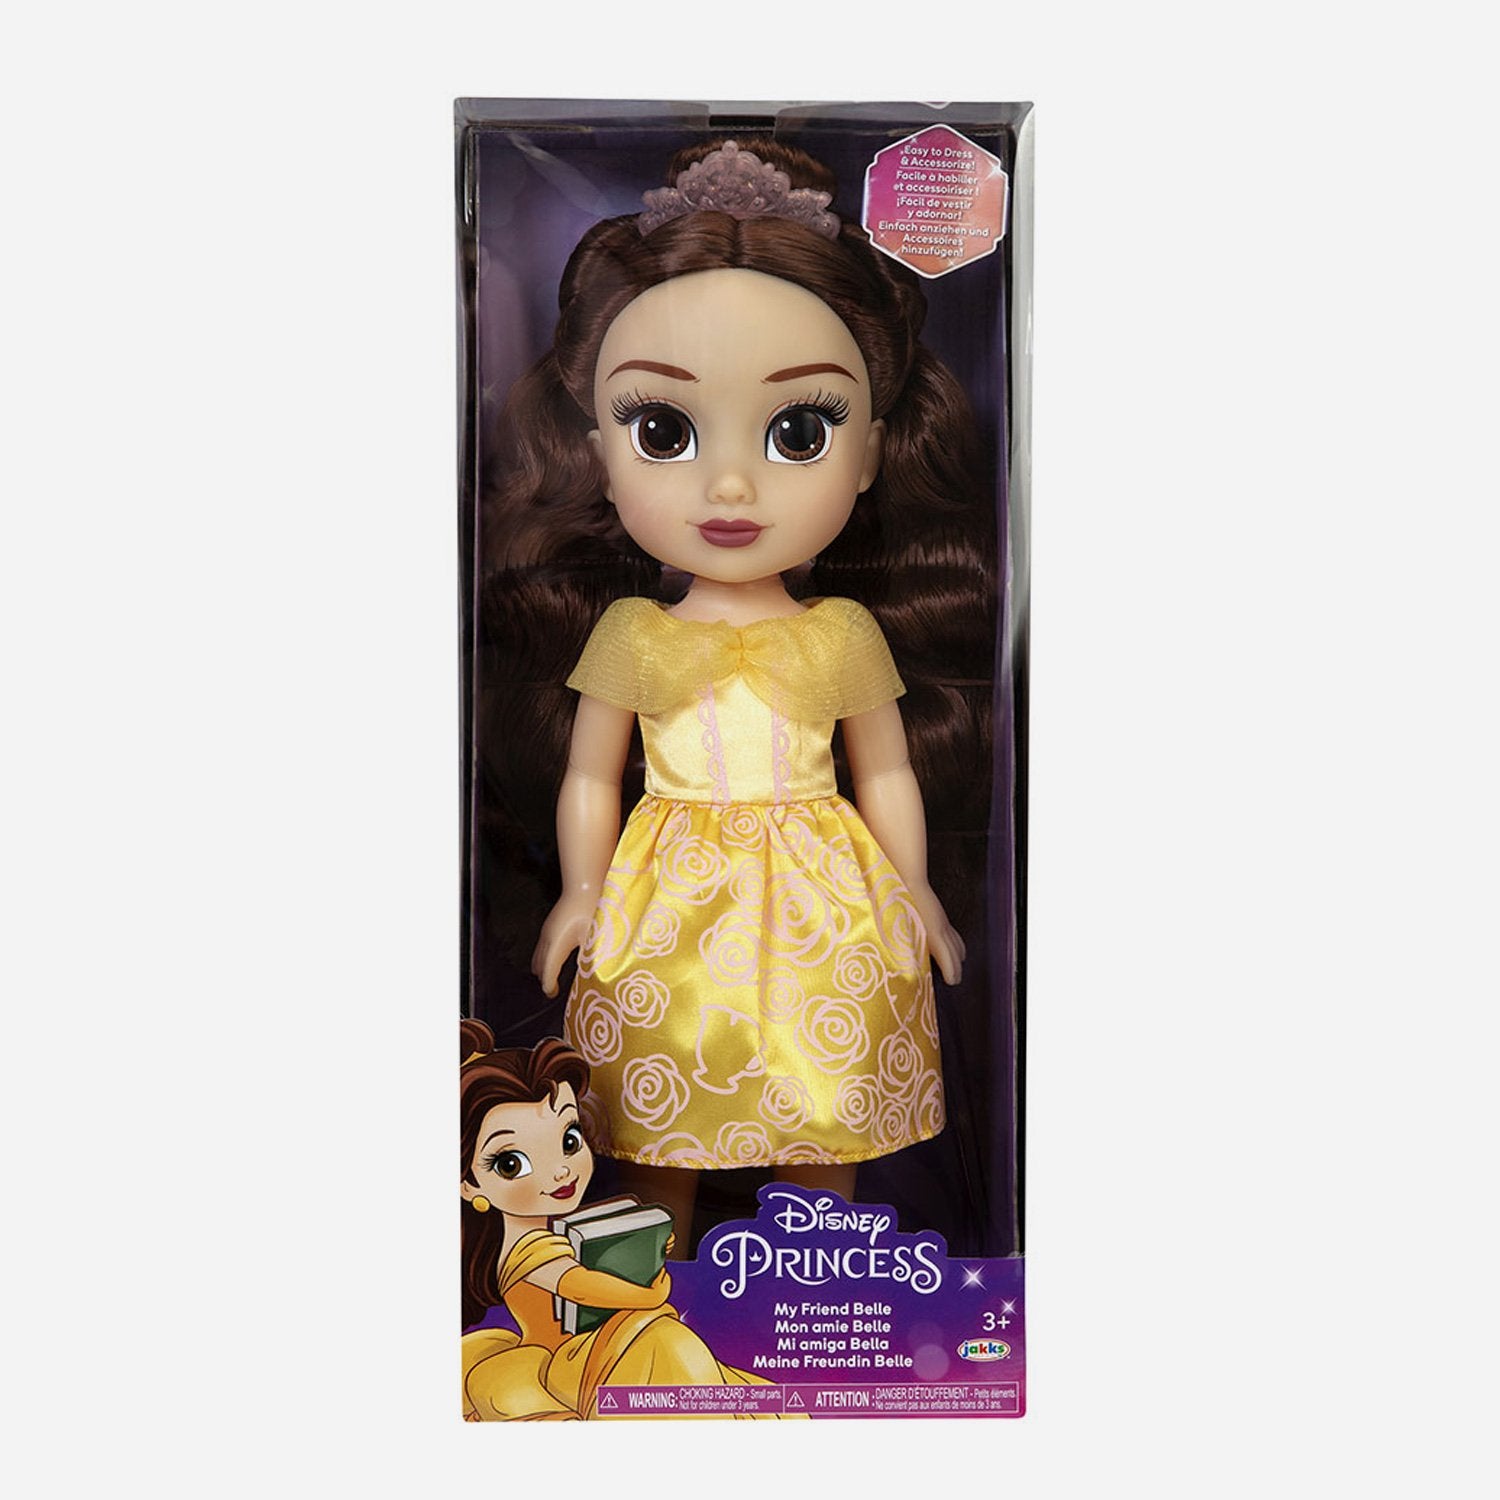 Shop for Disney Princess My Friend Bell doll Online | The SM Store